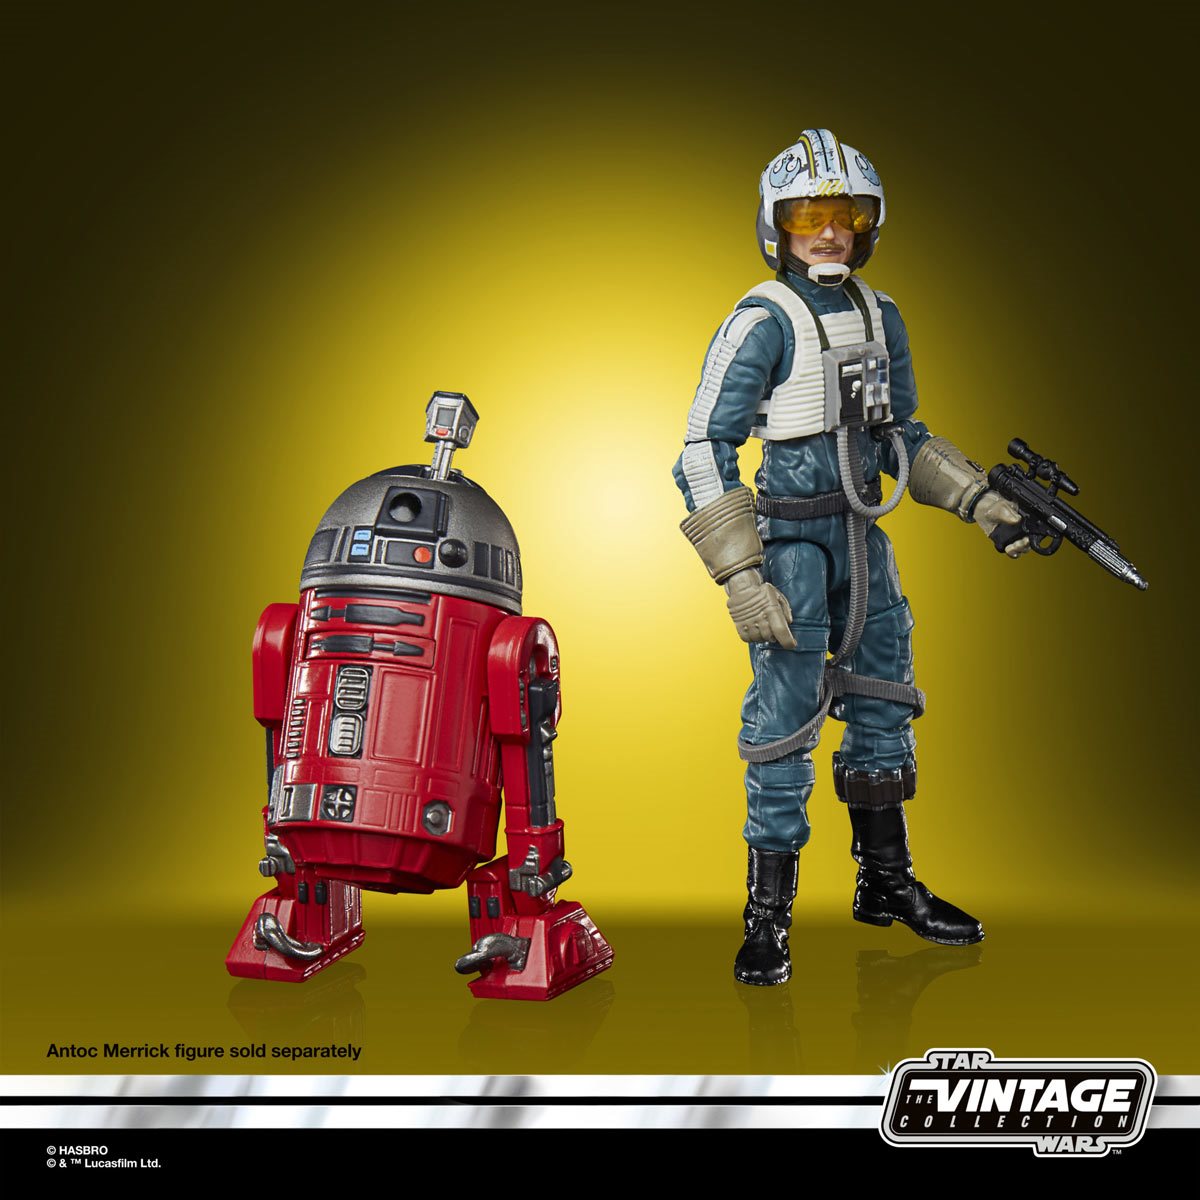 Star Wars The Vintage Collection R2-SHW (Antoc Merrick’s Droid) 3 3/4-Inch Action Figure HSF7789 5010994171674